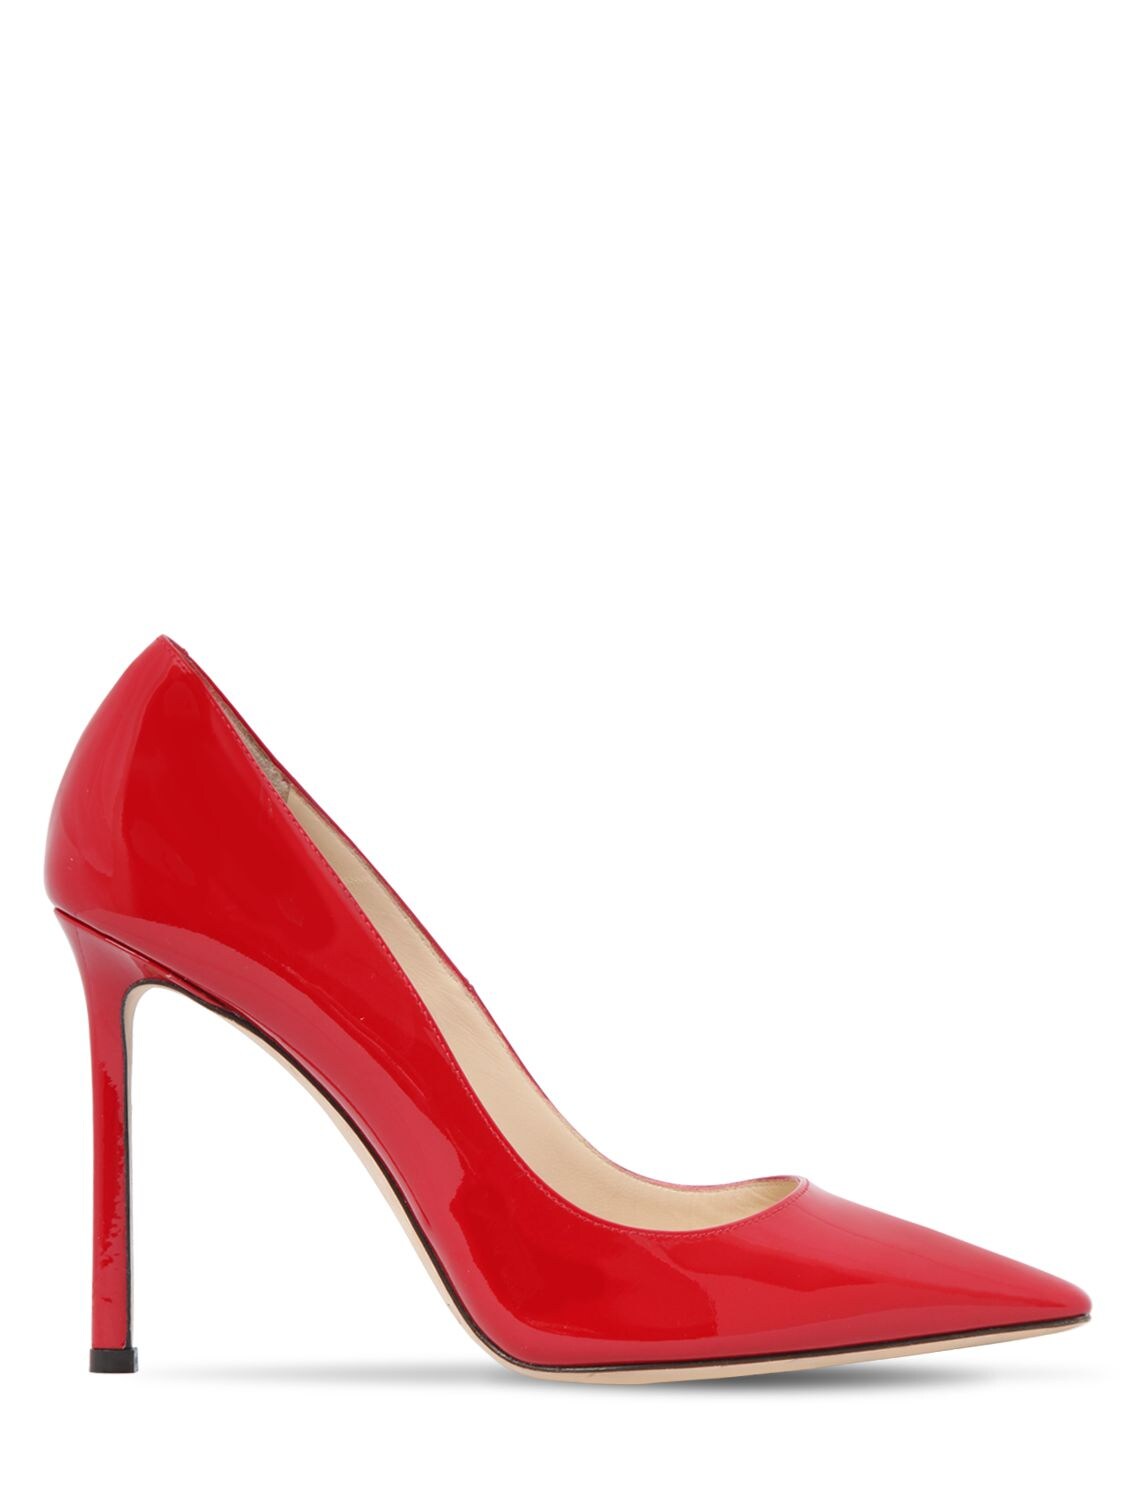 100MM ROMY PATENT LEATHER PUMPS